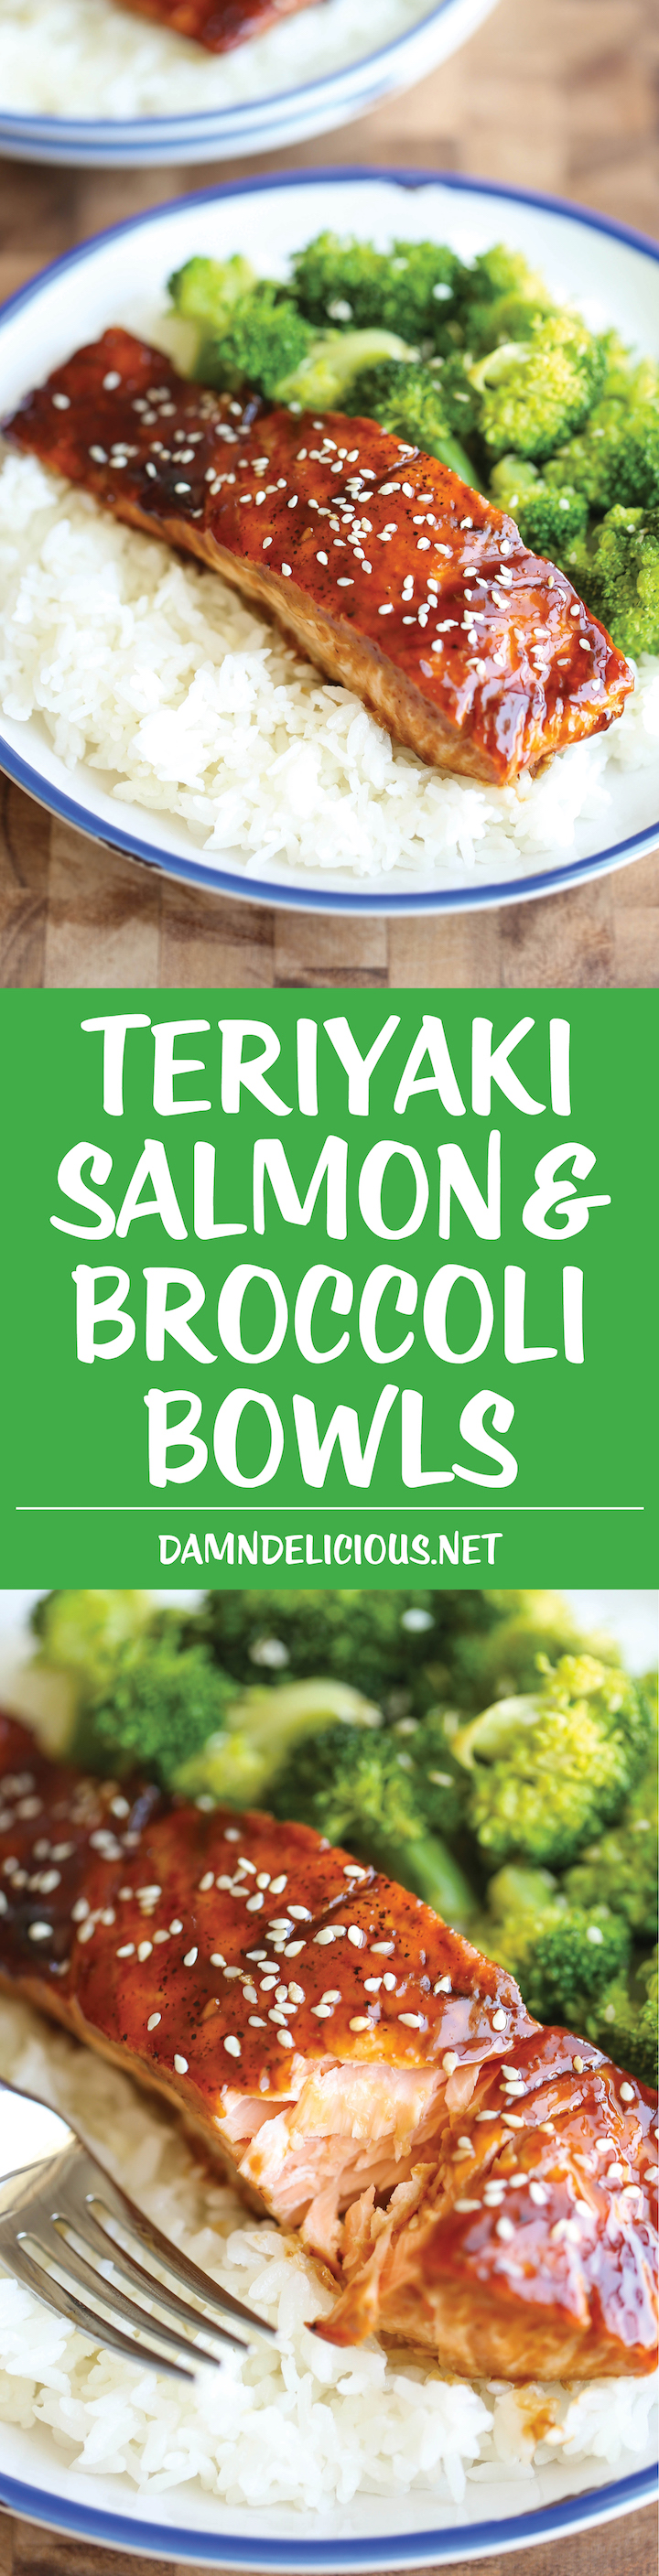 Teriyaki Salmon and Broccoli Bowls - There's no need for takeout anymore - you can easily make homemade teriyaki bowls with rice and veggies in minutes!